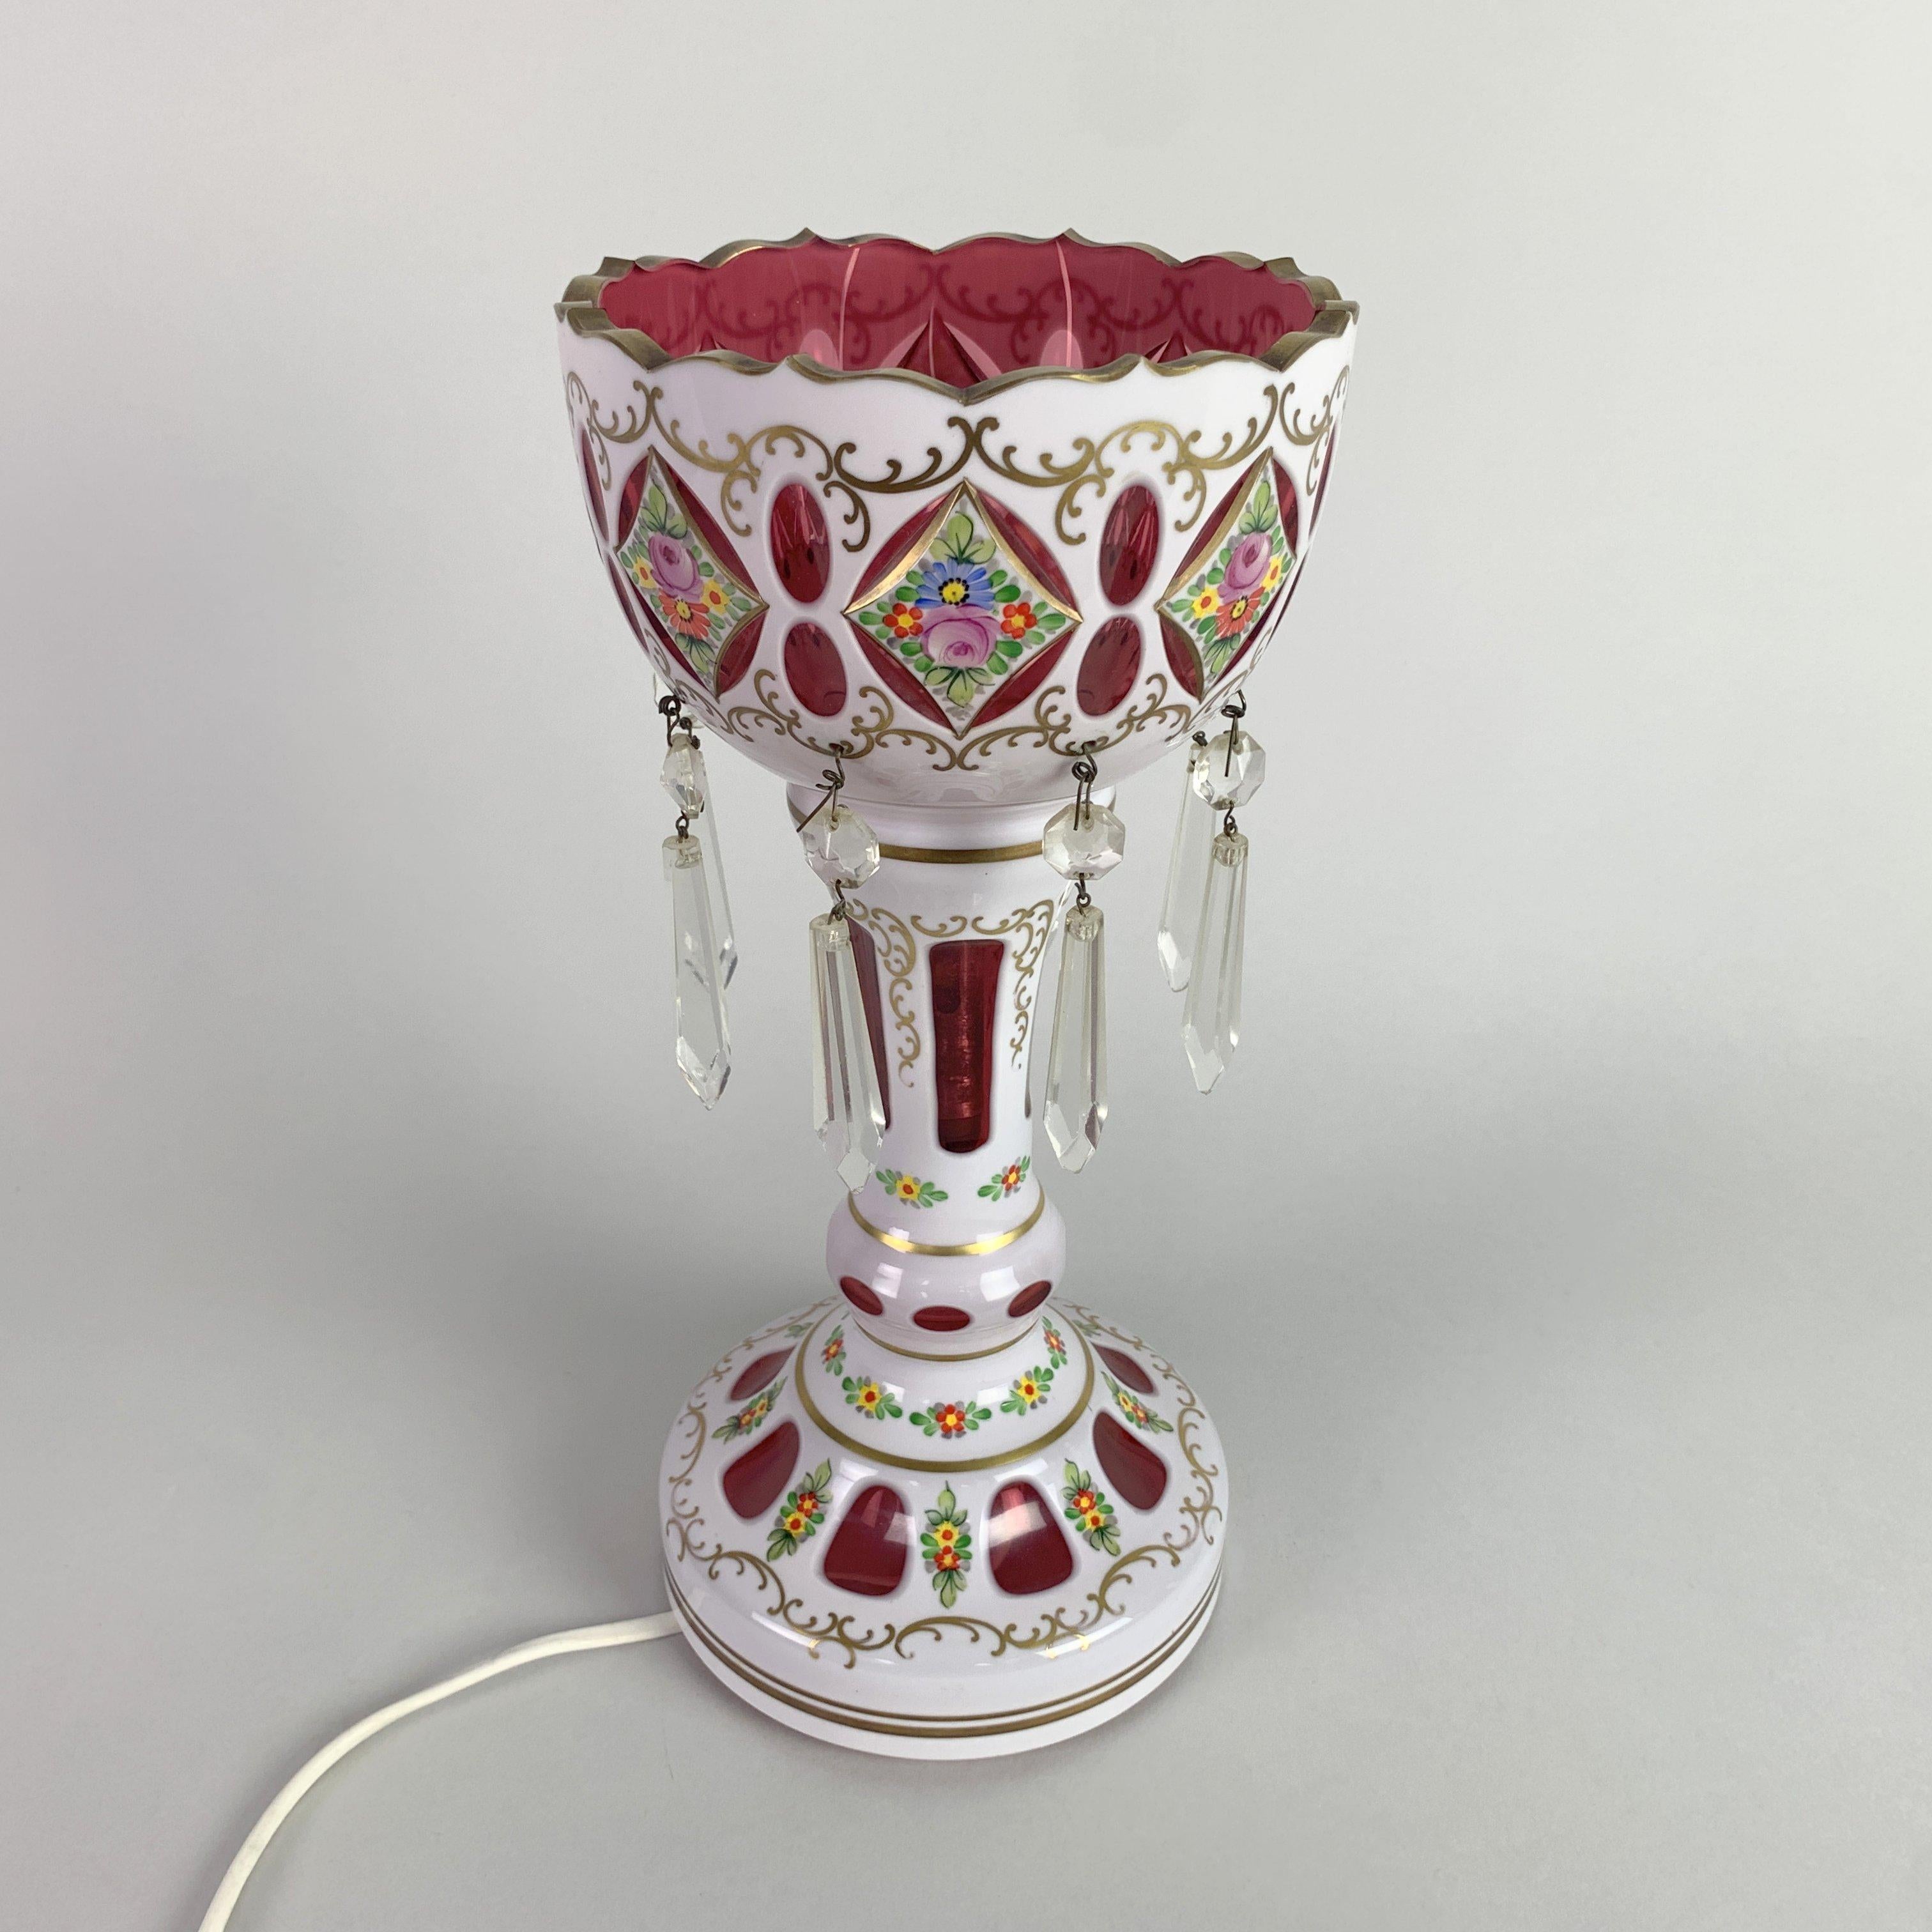 Bohemian glass lustre lamp with hand painted floral decoration with gilt accents. Ruby underlay with white overlay and enameled glass, bearing eight cut glass pendants. One of the pendants is unfortunately chipped (see photo), but overall the lamp